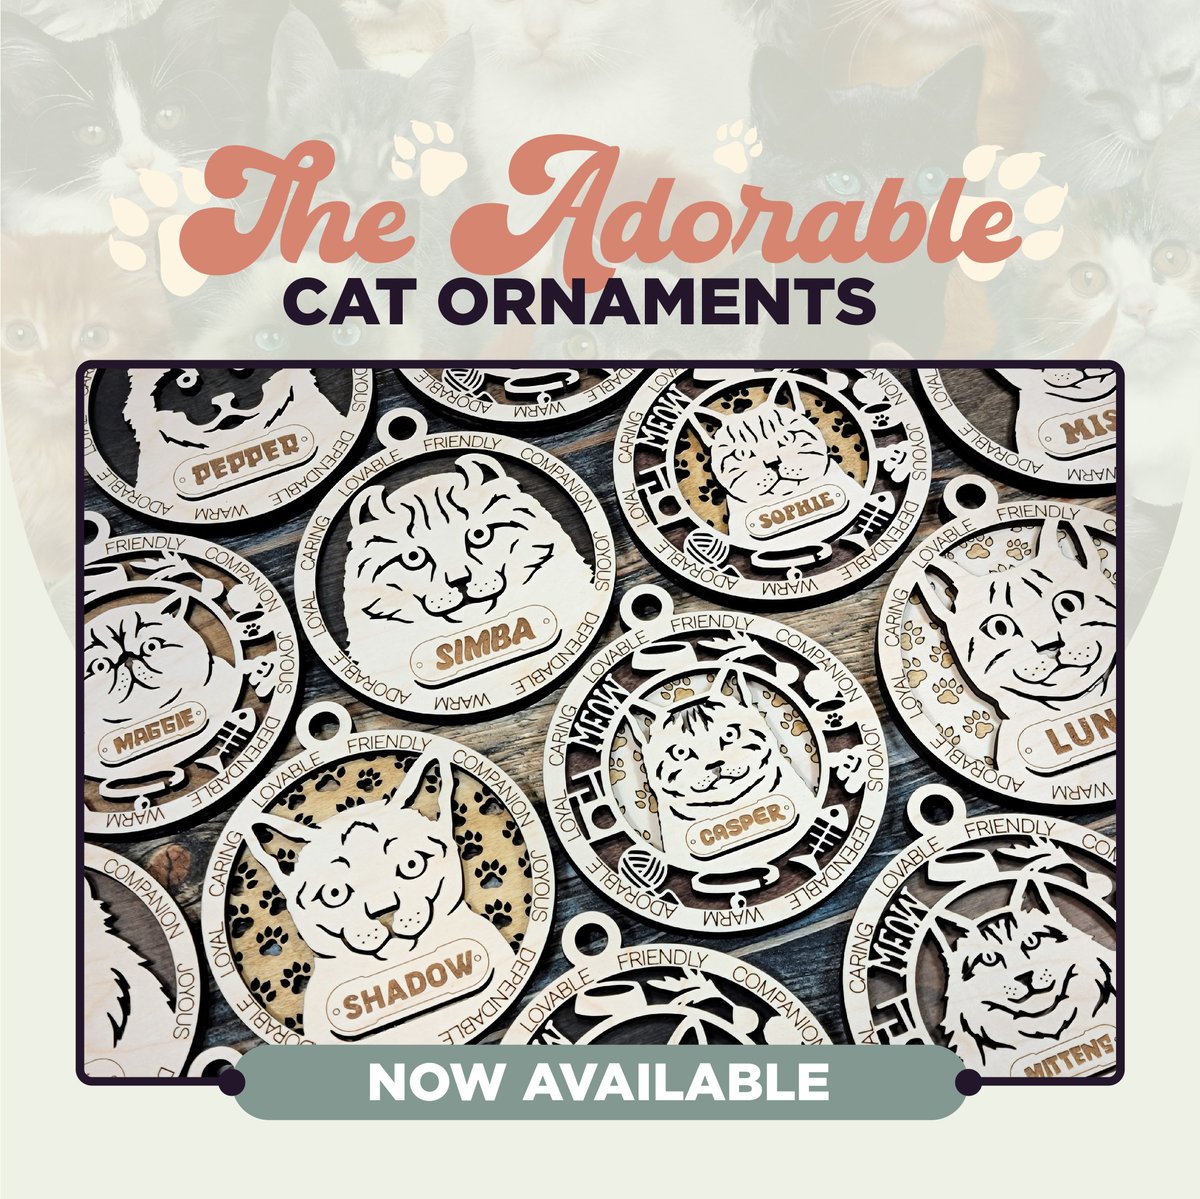 Designs finished and now available on our store for all Dog and Cat Owners and Lovers out there 🥰

Get yours here:
Dog Ornaments: bit.ly/doghangers
Cat Ornaments: bit.ly/cathangers

#laserengraving  #dogornament #catornament #dogremembrance #catremembrance